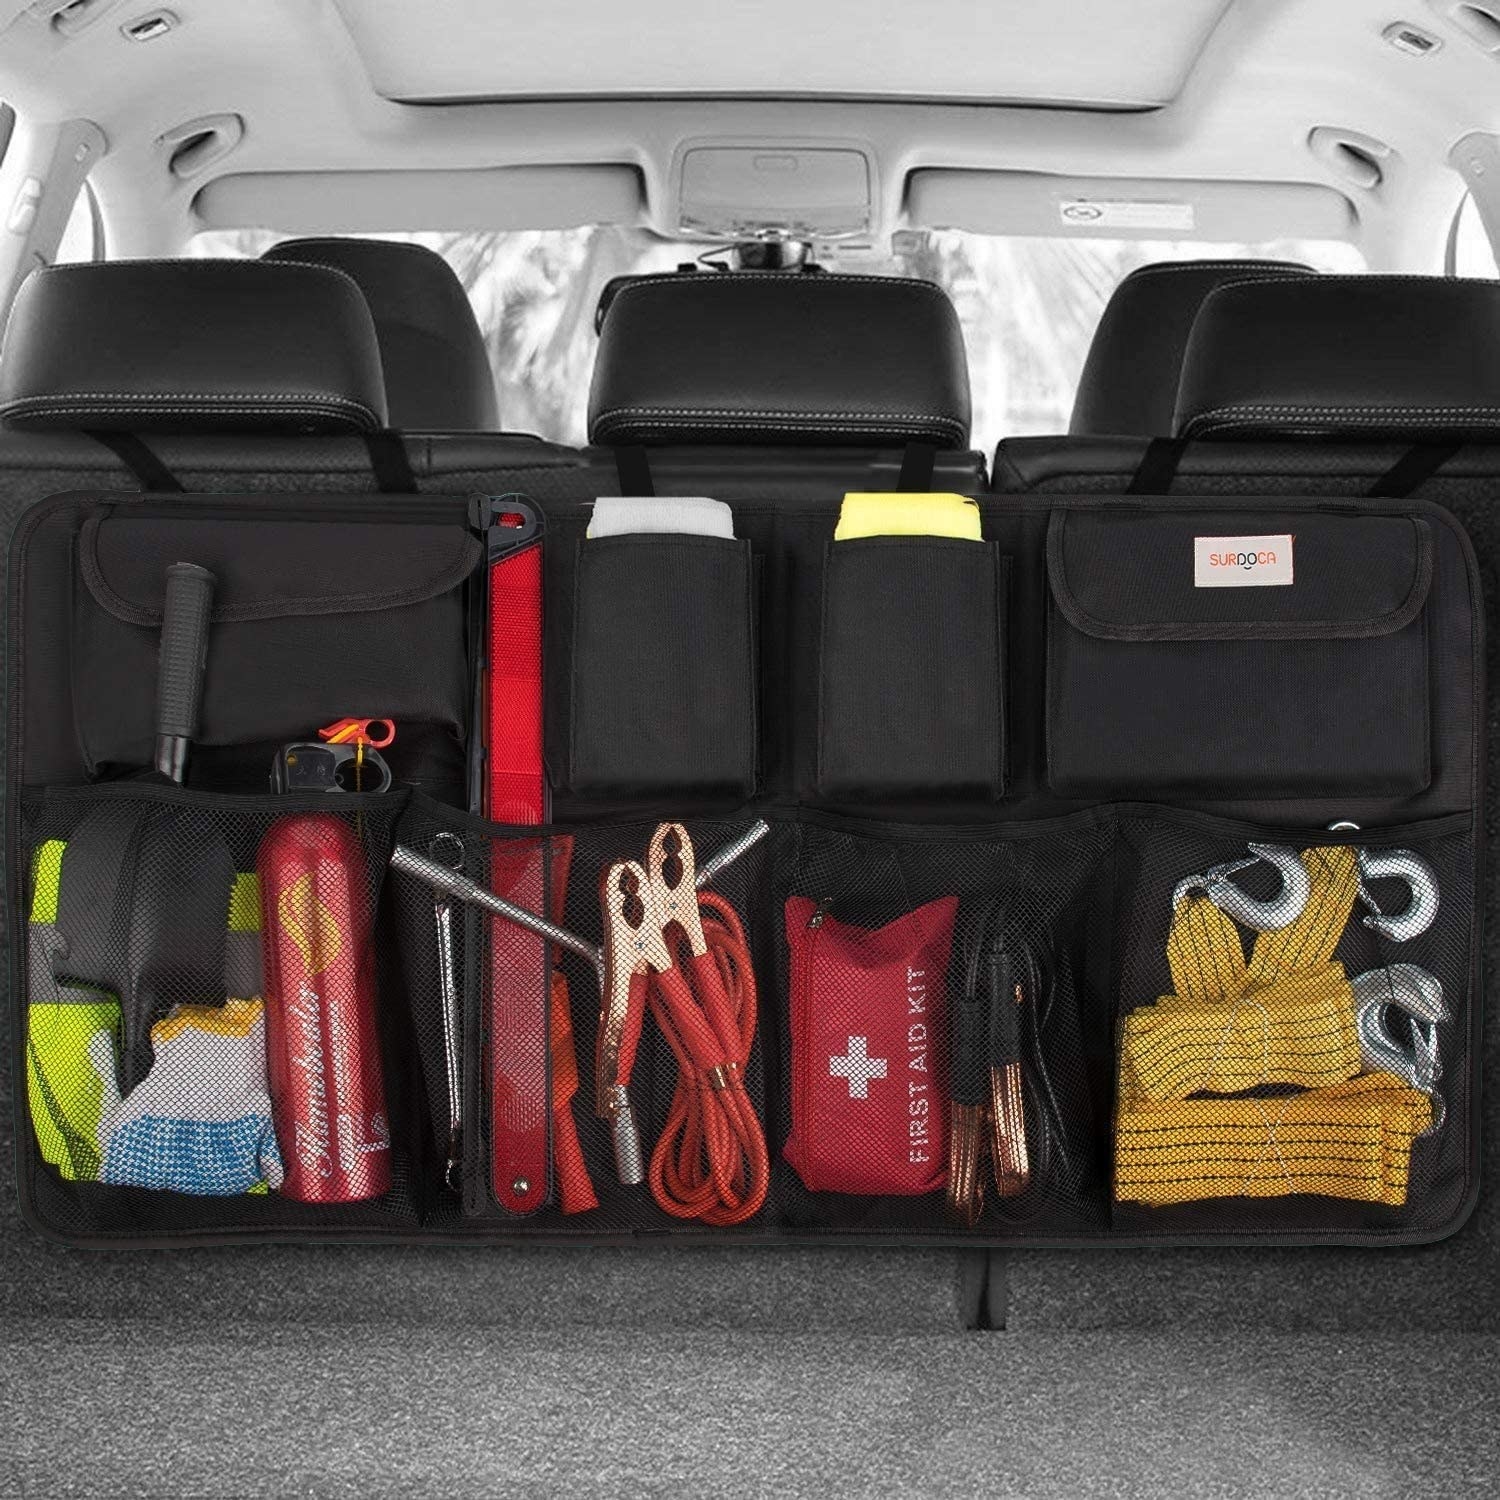 The trunk organizer filled with stuff